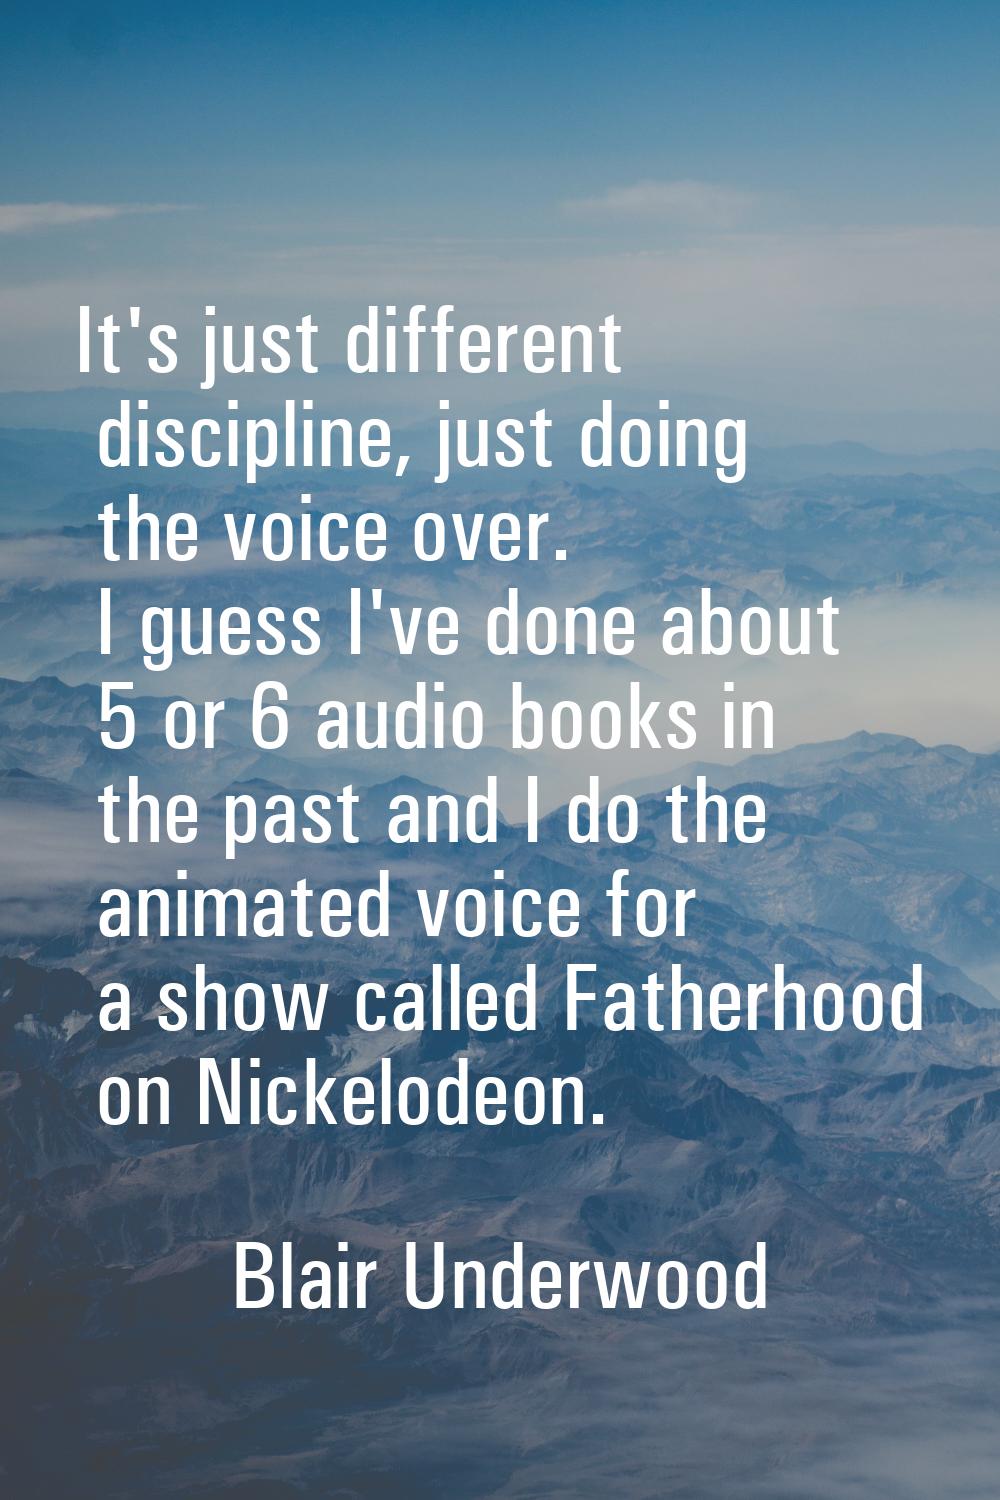 It's just different discipline, just doing the voice over. I guess I've done about 5 or 6 audio boo